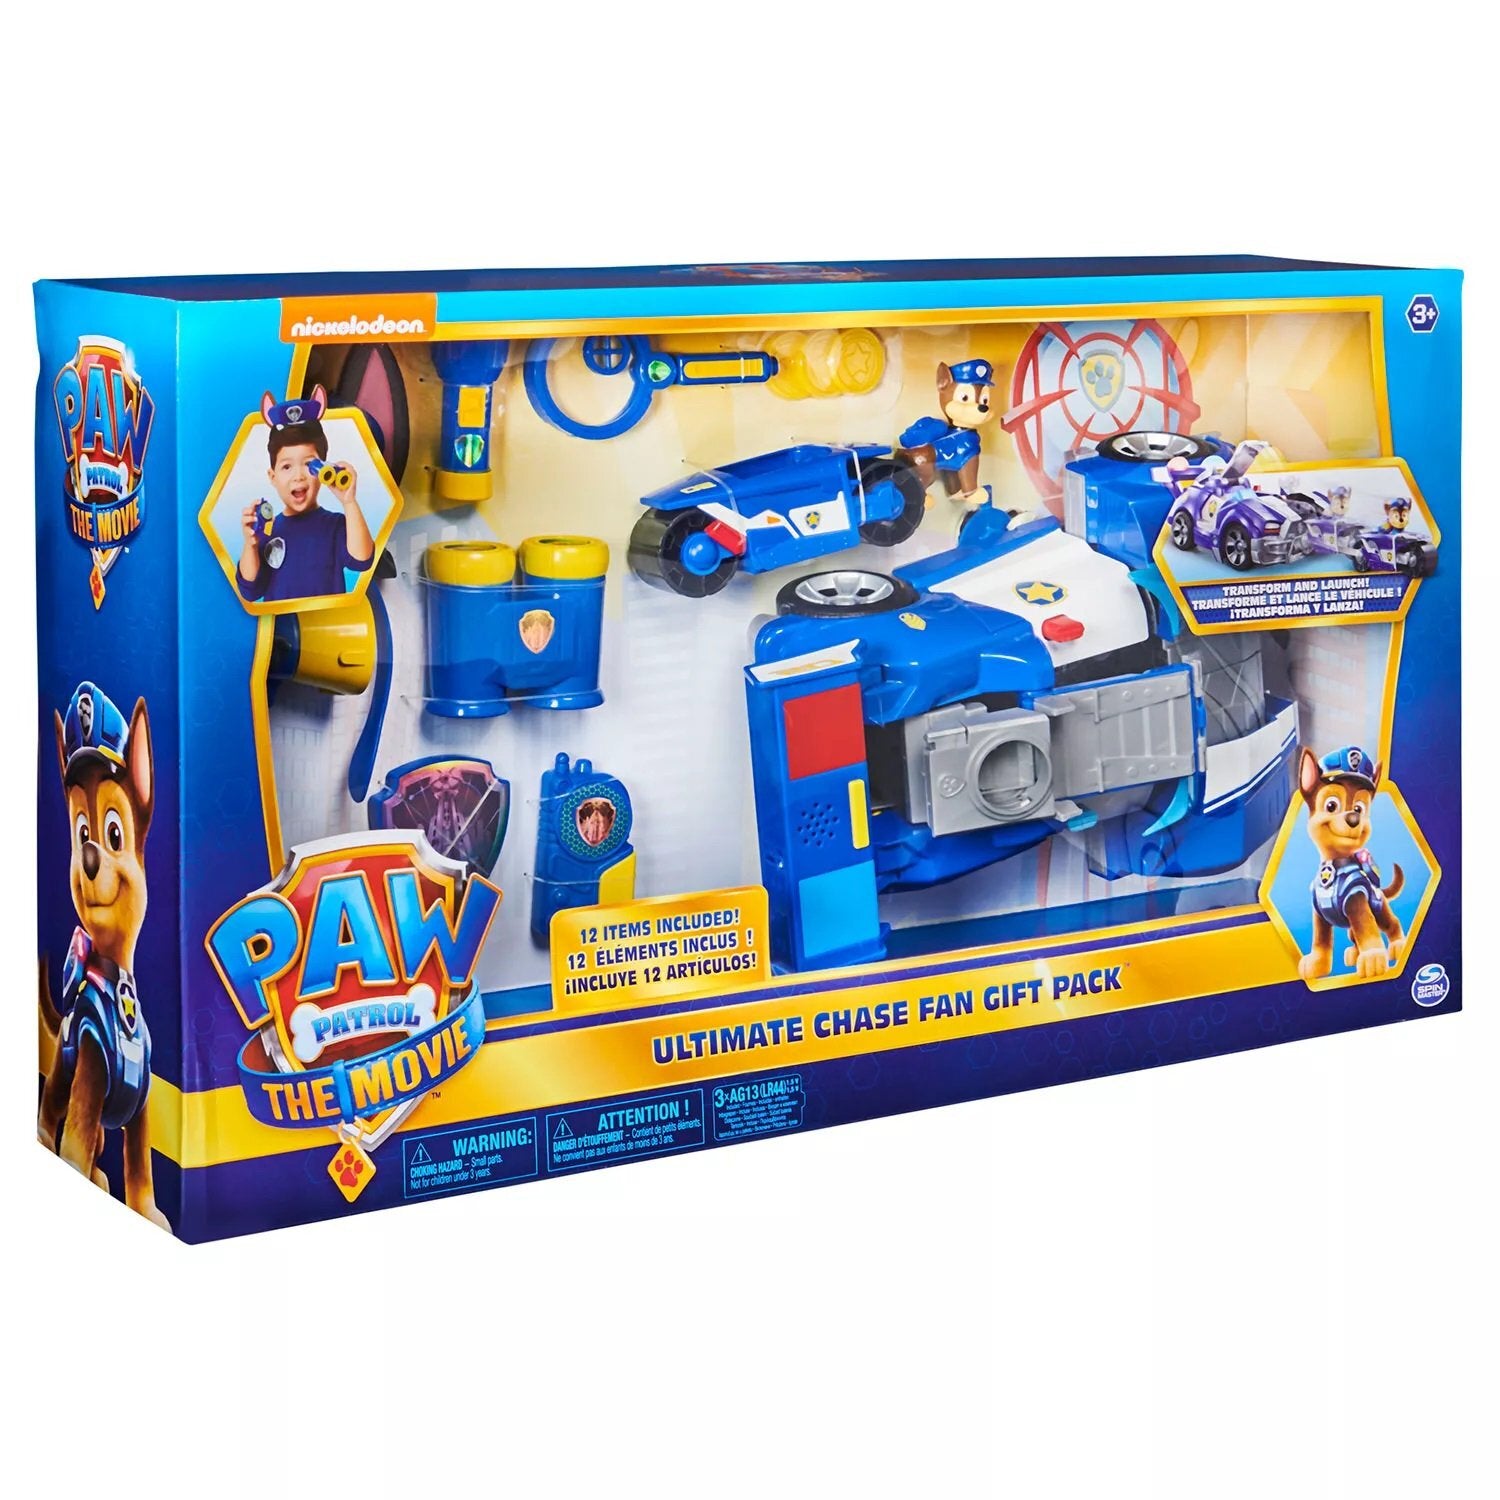 Paw Patrol The Movie Ultimate Chase Fan Gift Pack